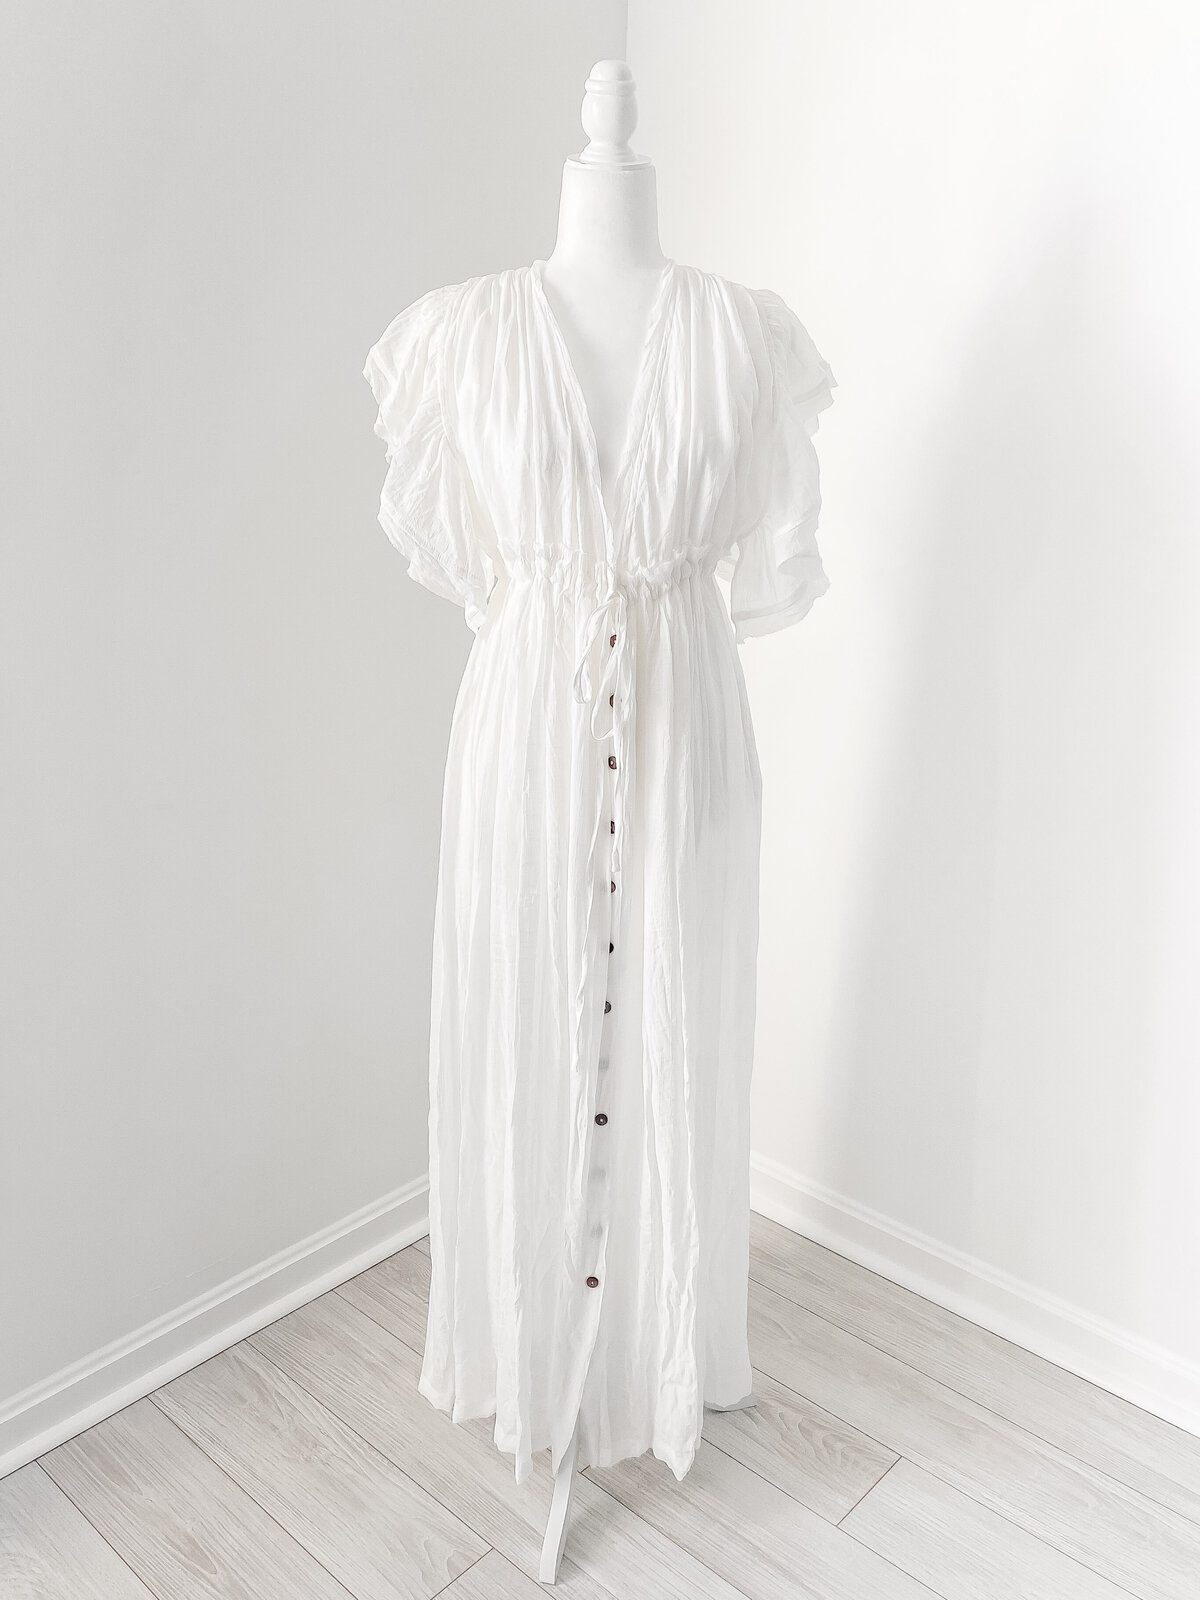 A DC Newborn Photographer photo of a long white dress with flutter sleeves and brown buttons down the front and a deep v neck